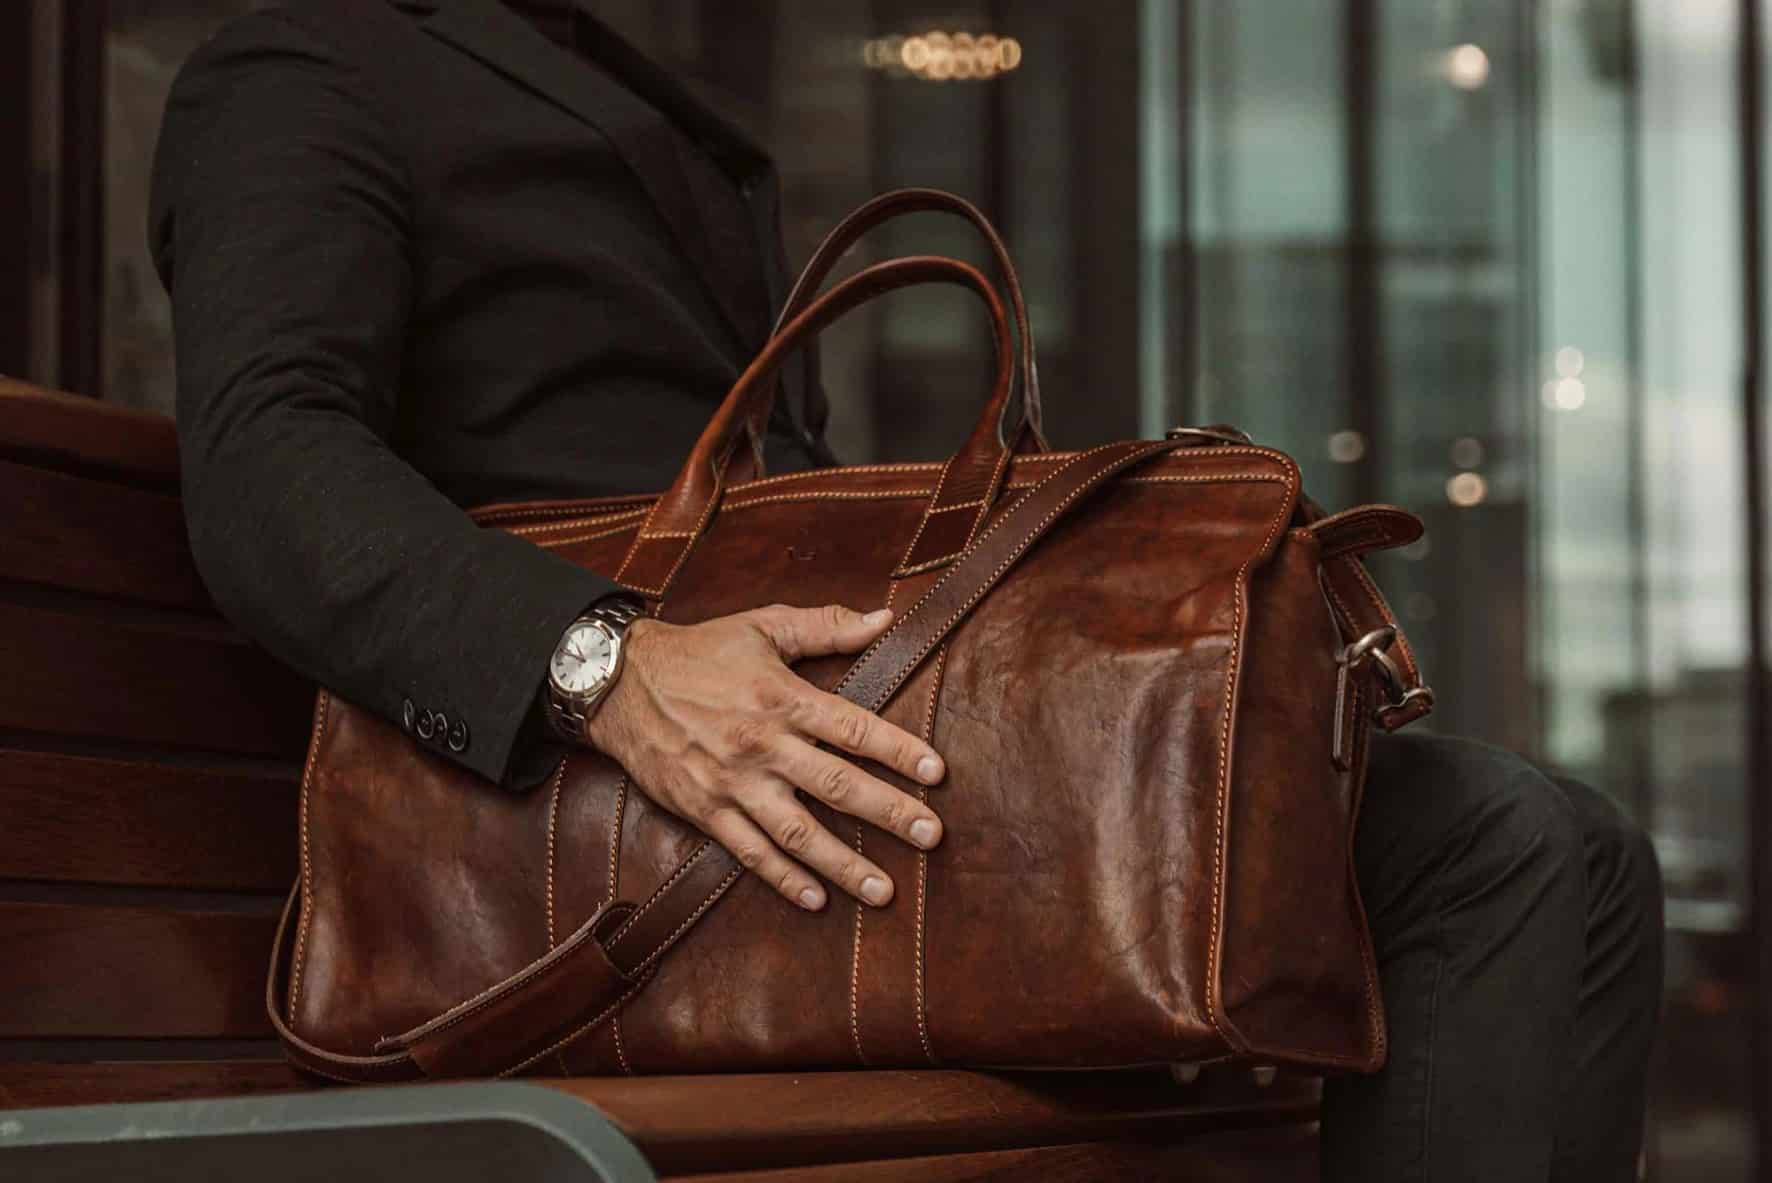 Benefits of Owning a Leather Duffle Bag